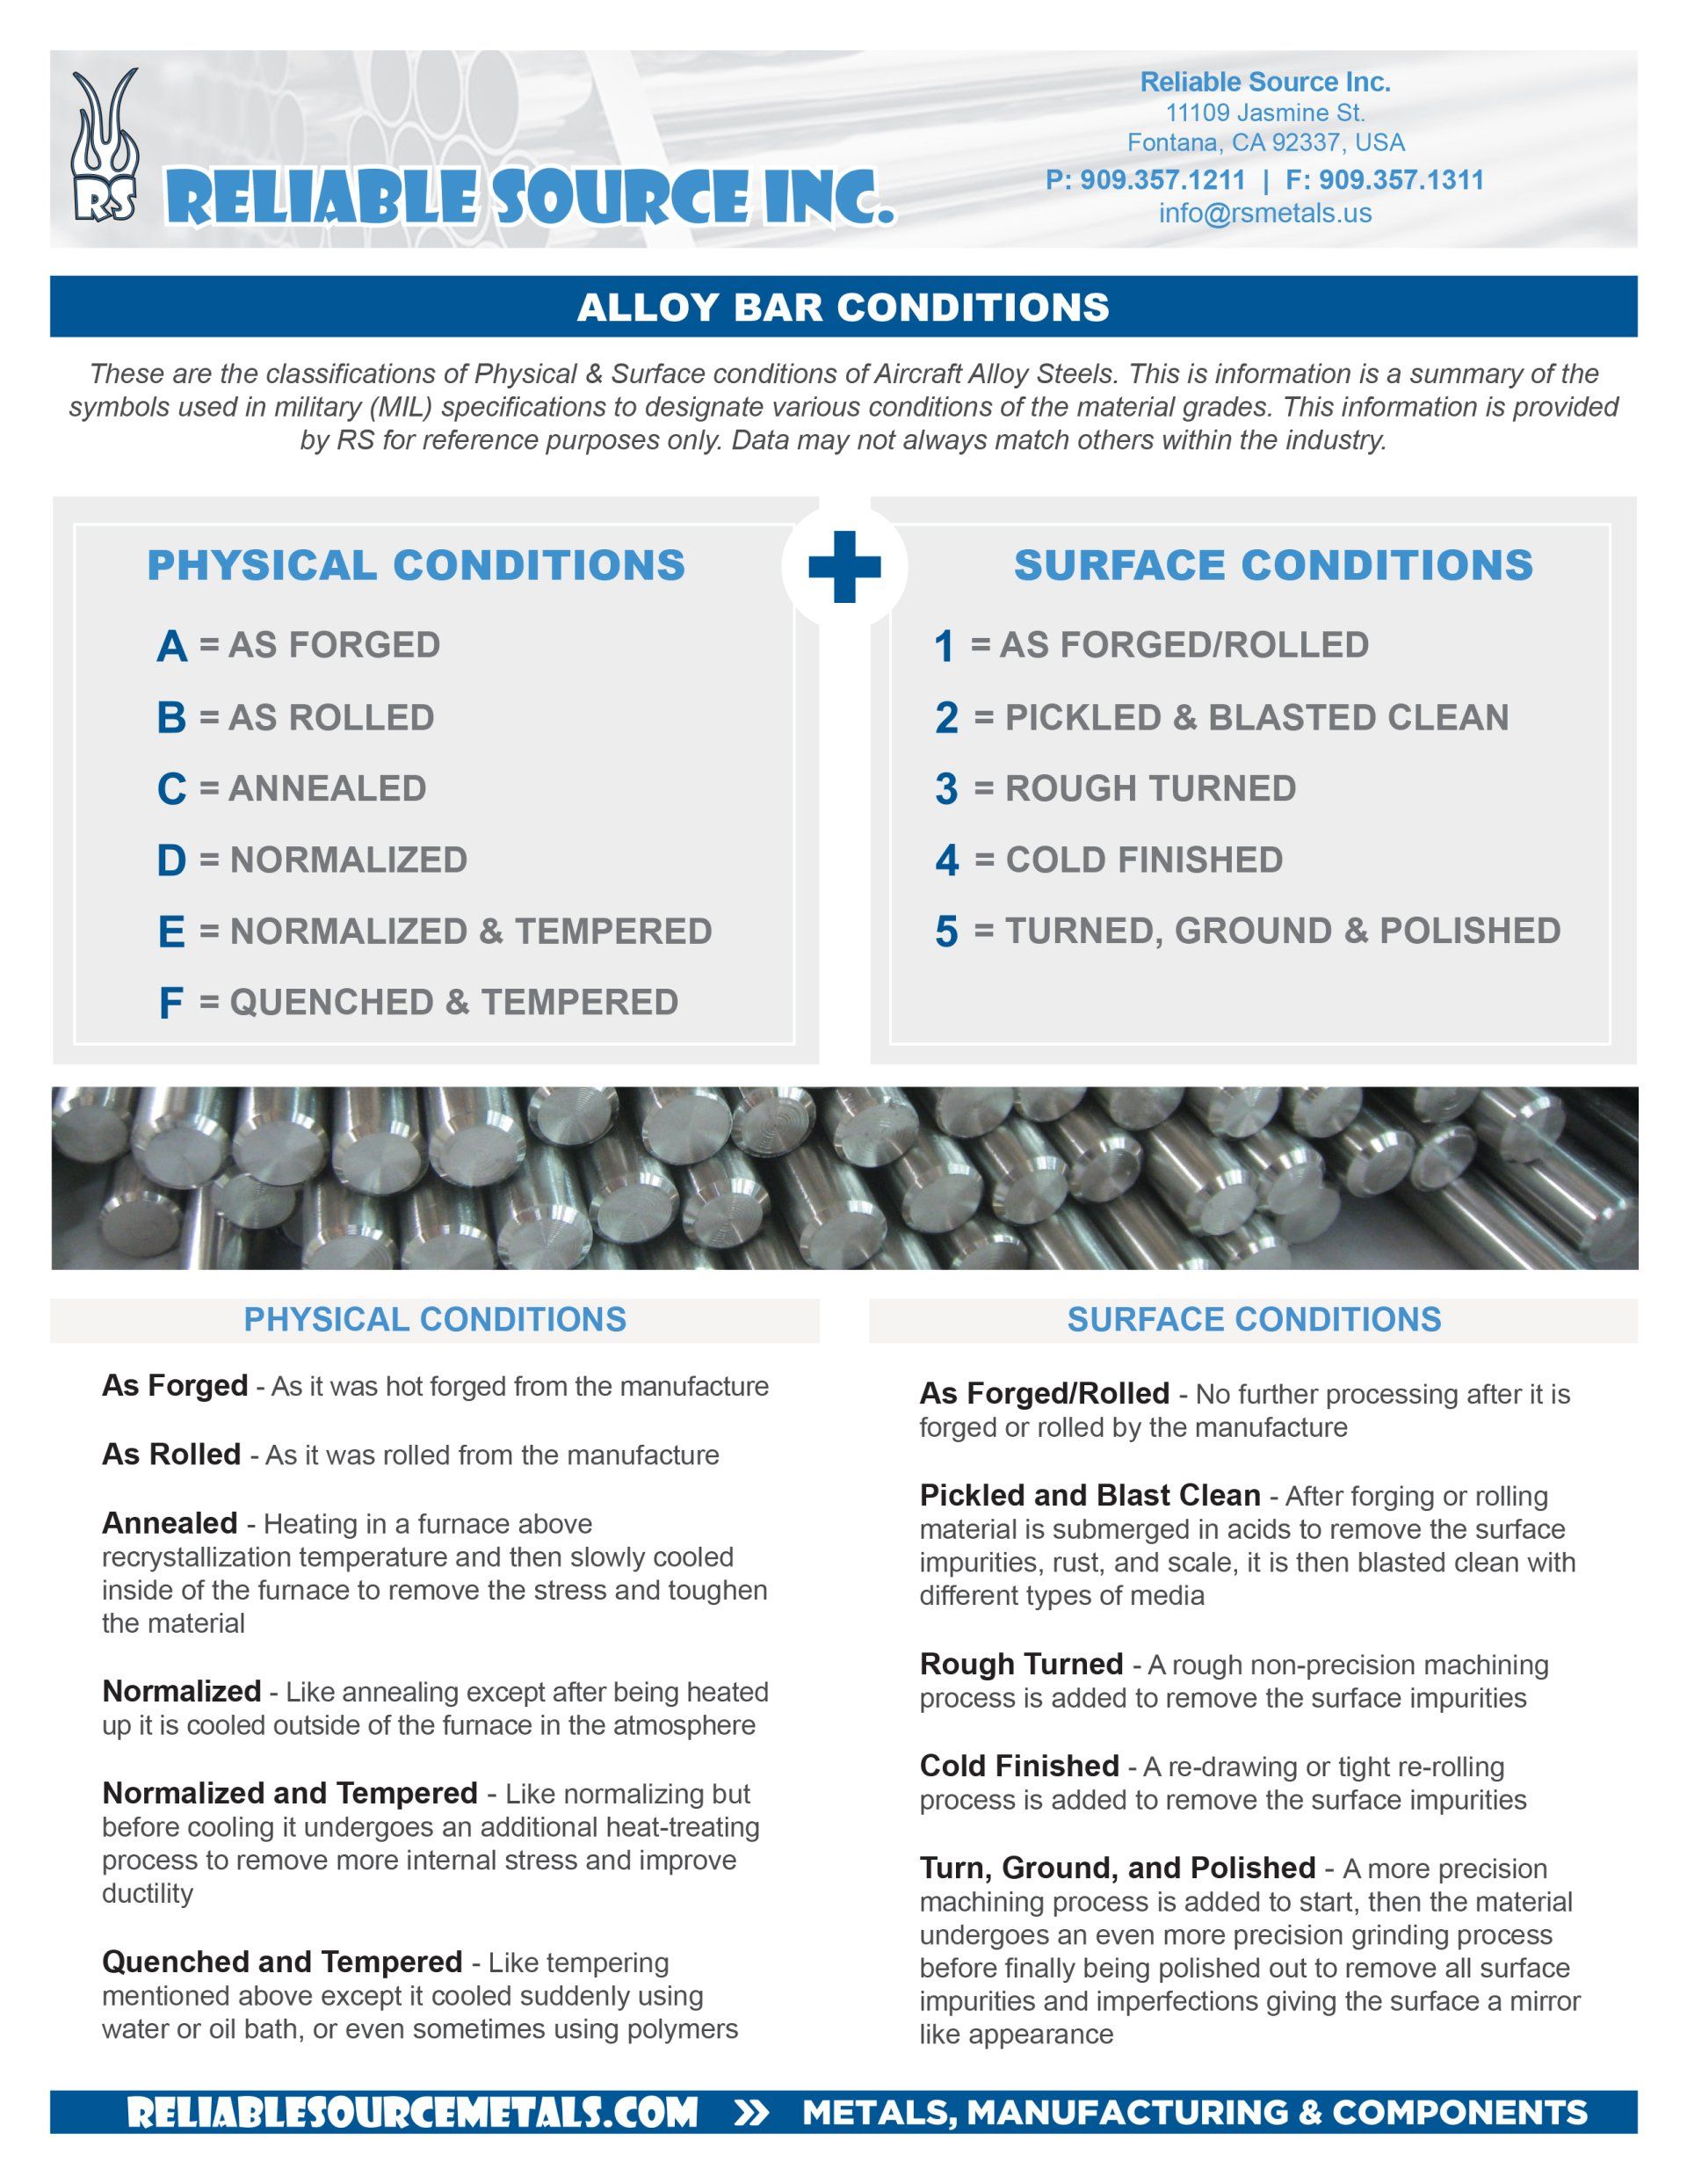 Reliable Source Inc. - Alloy Bar Conditions